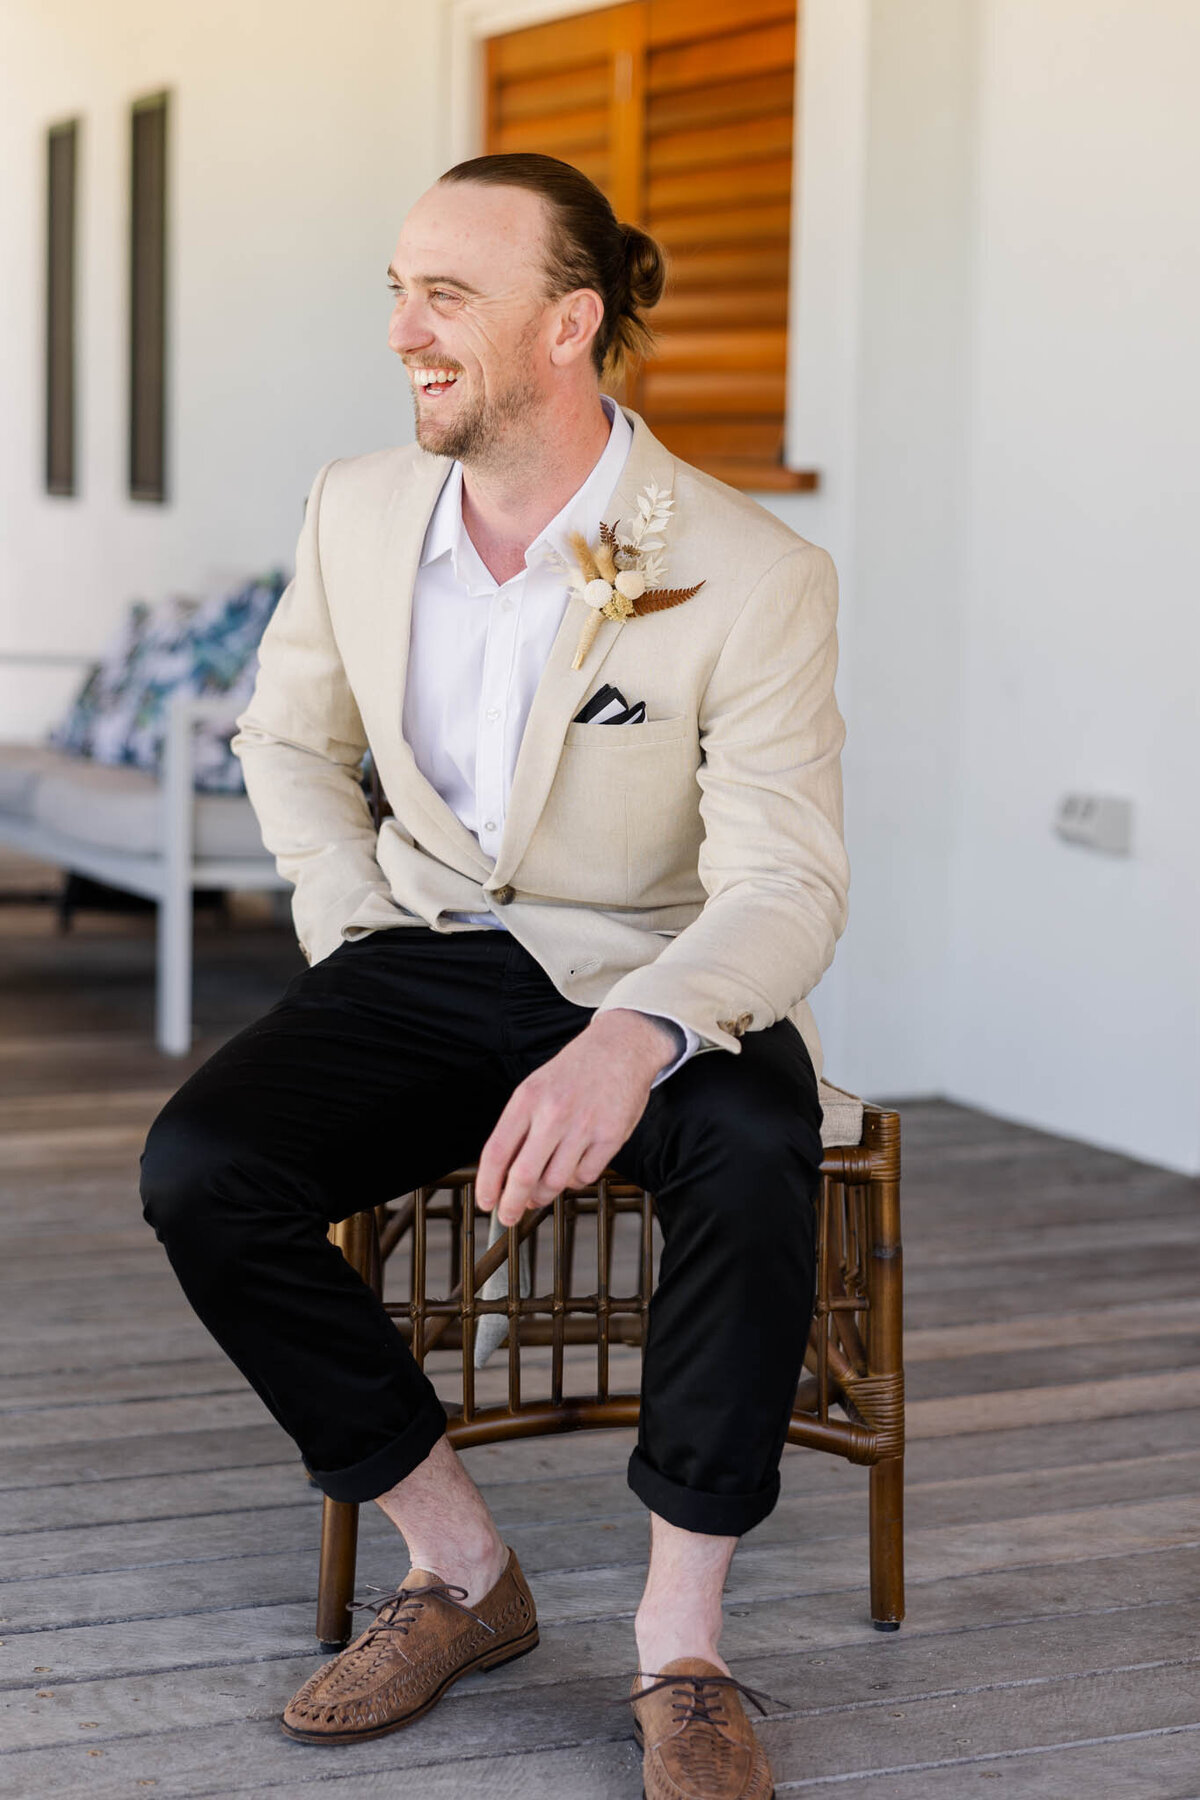 groom sits on a chair and laughs on his wedding day.